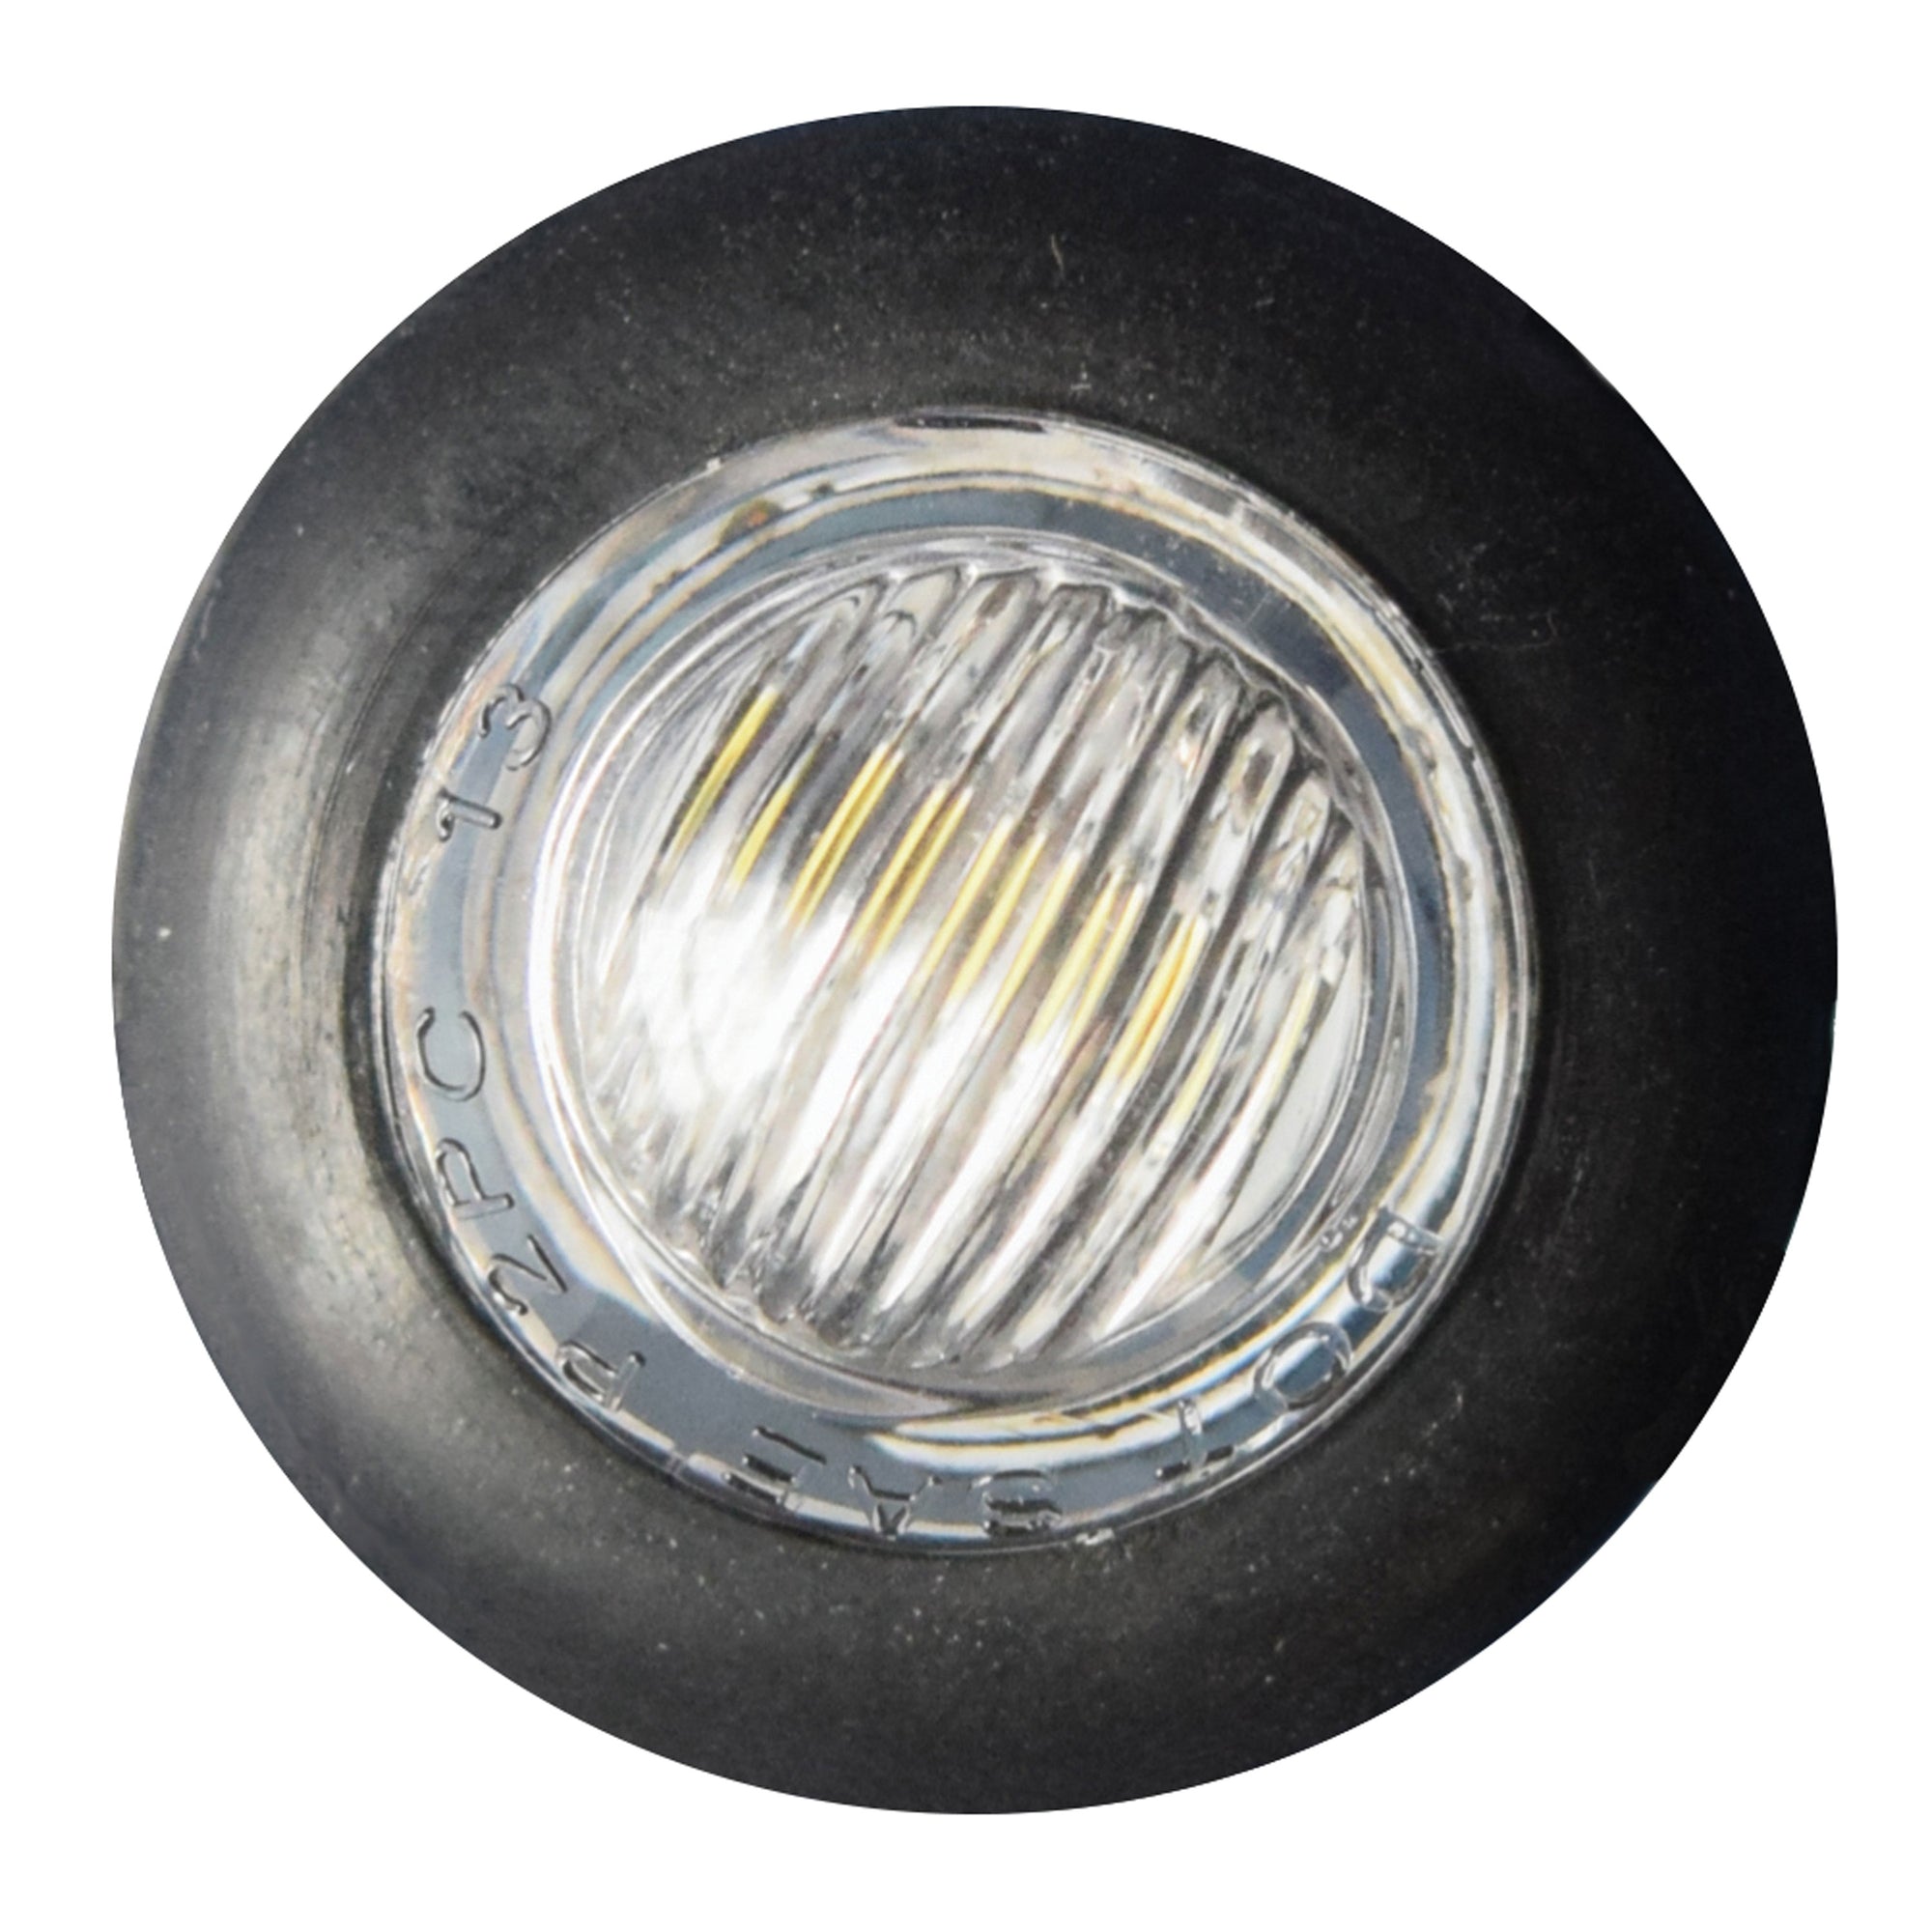 Fasteners Unlimited 003-183CW Bullet Led Light Clear W/